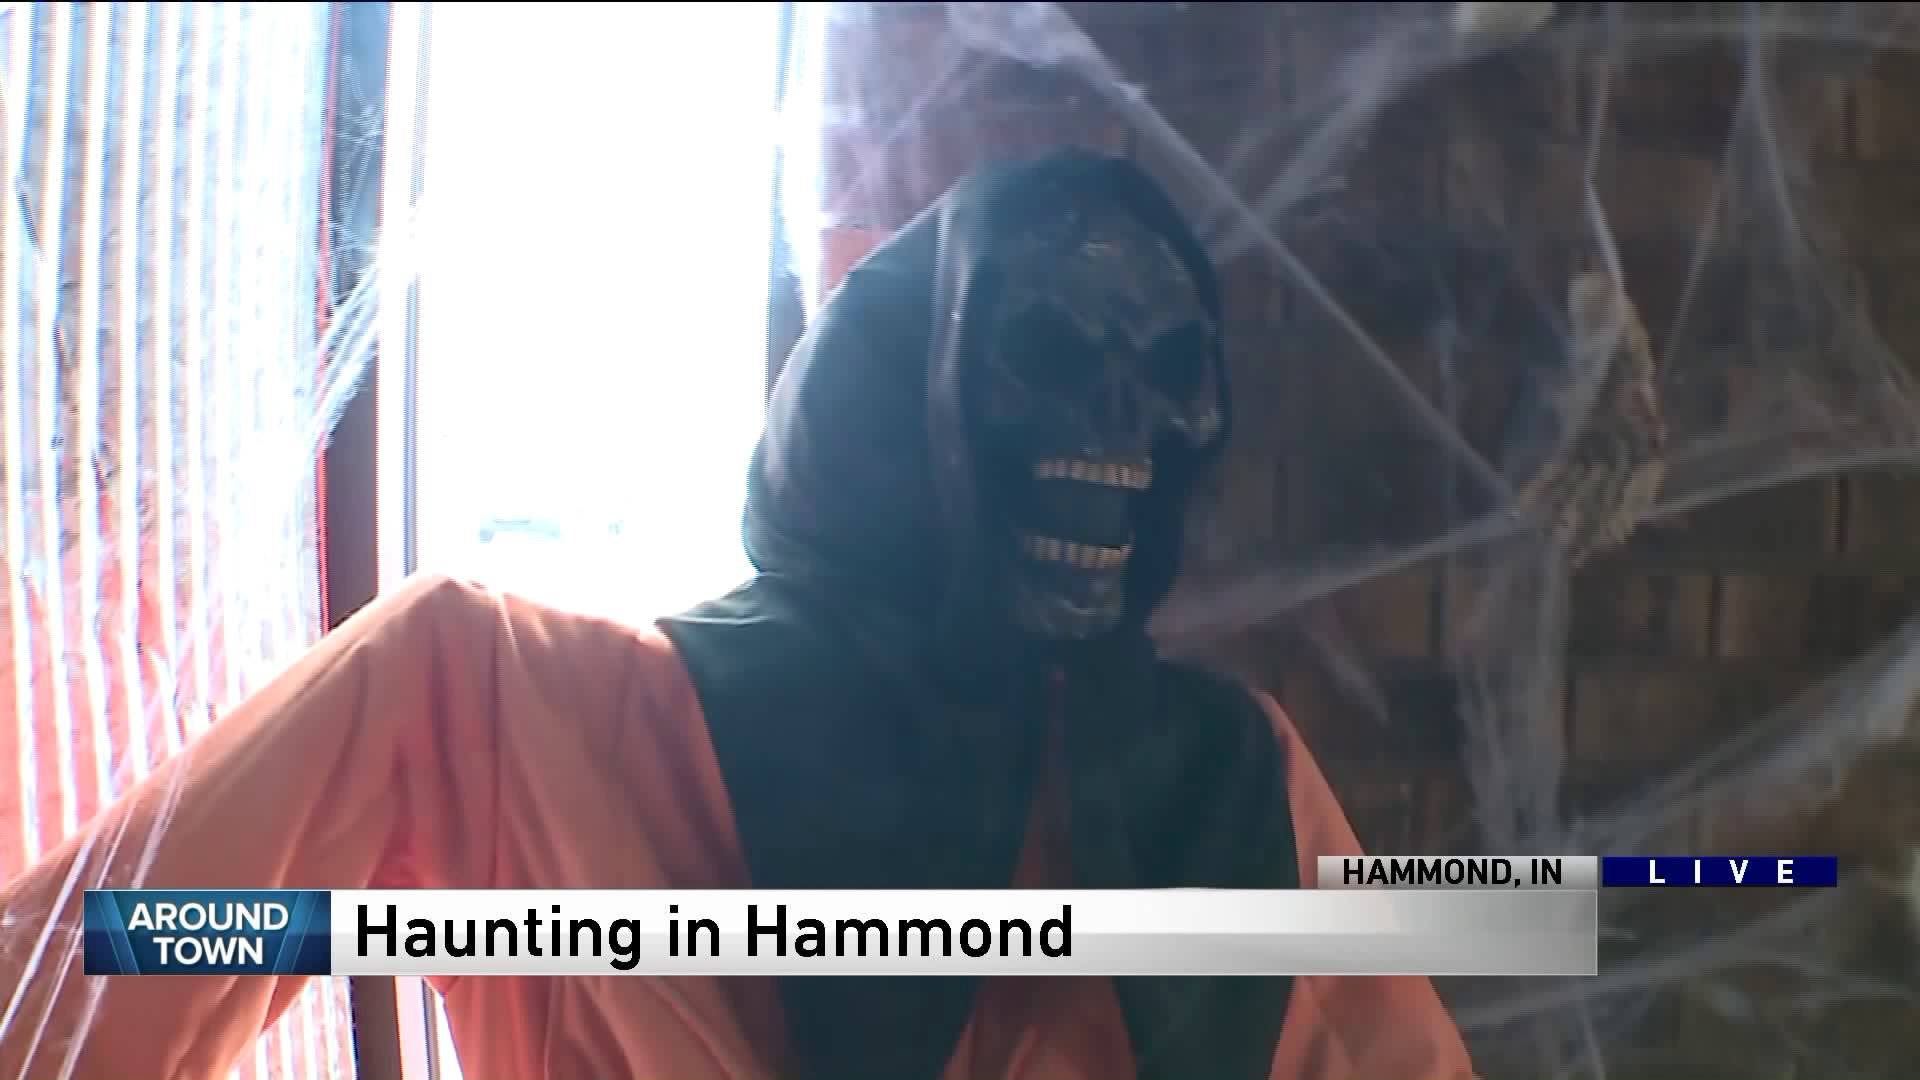 Around Town previews the 2nd annual ‘Haunting in Hammond’